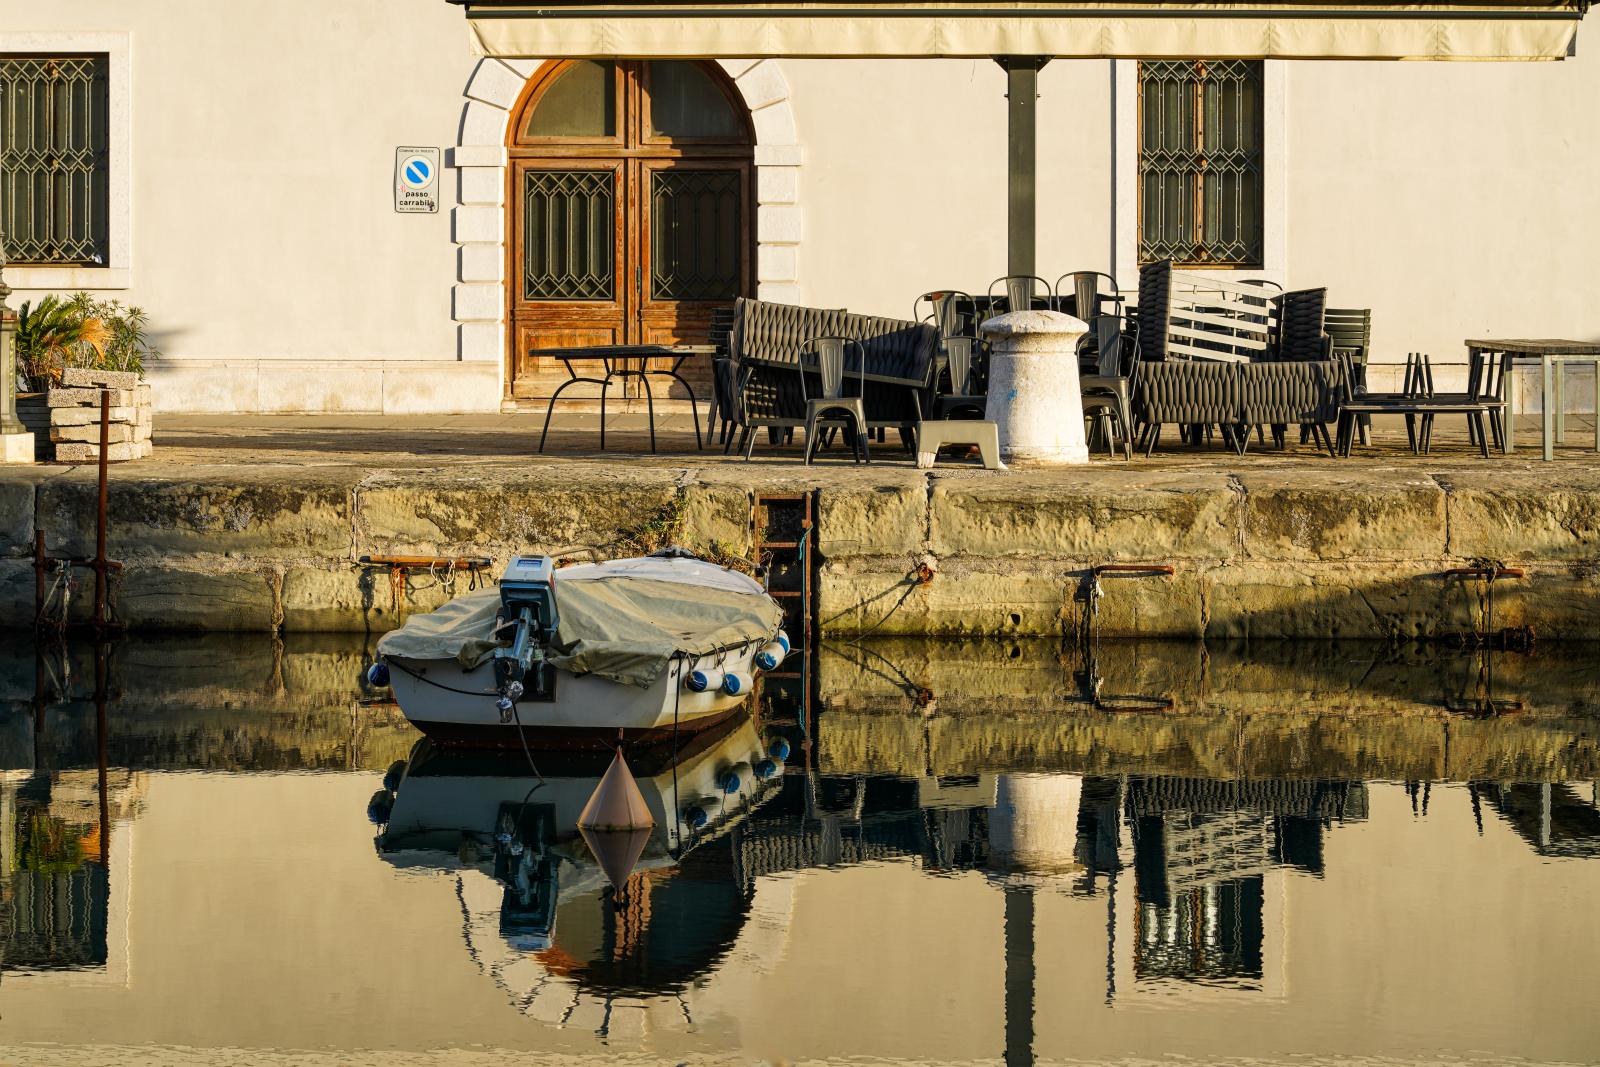 Morning Atmosphere in Trieste: Dawn’s Serenity on the Grand Canal | Buy this image